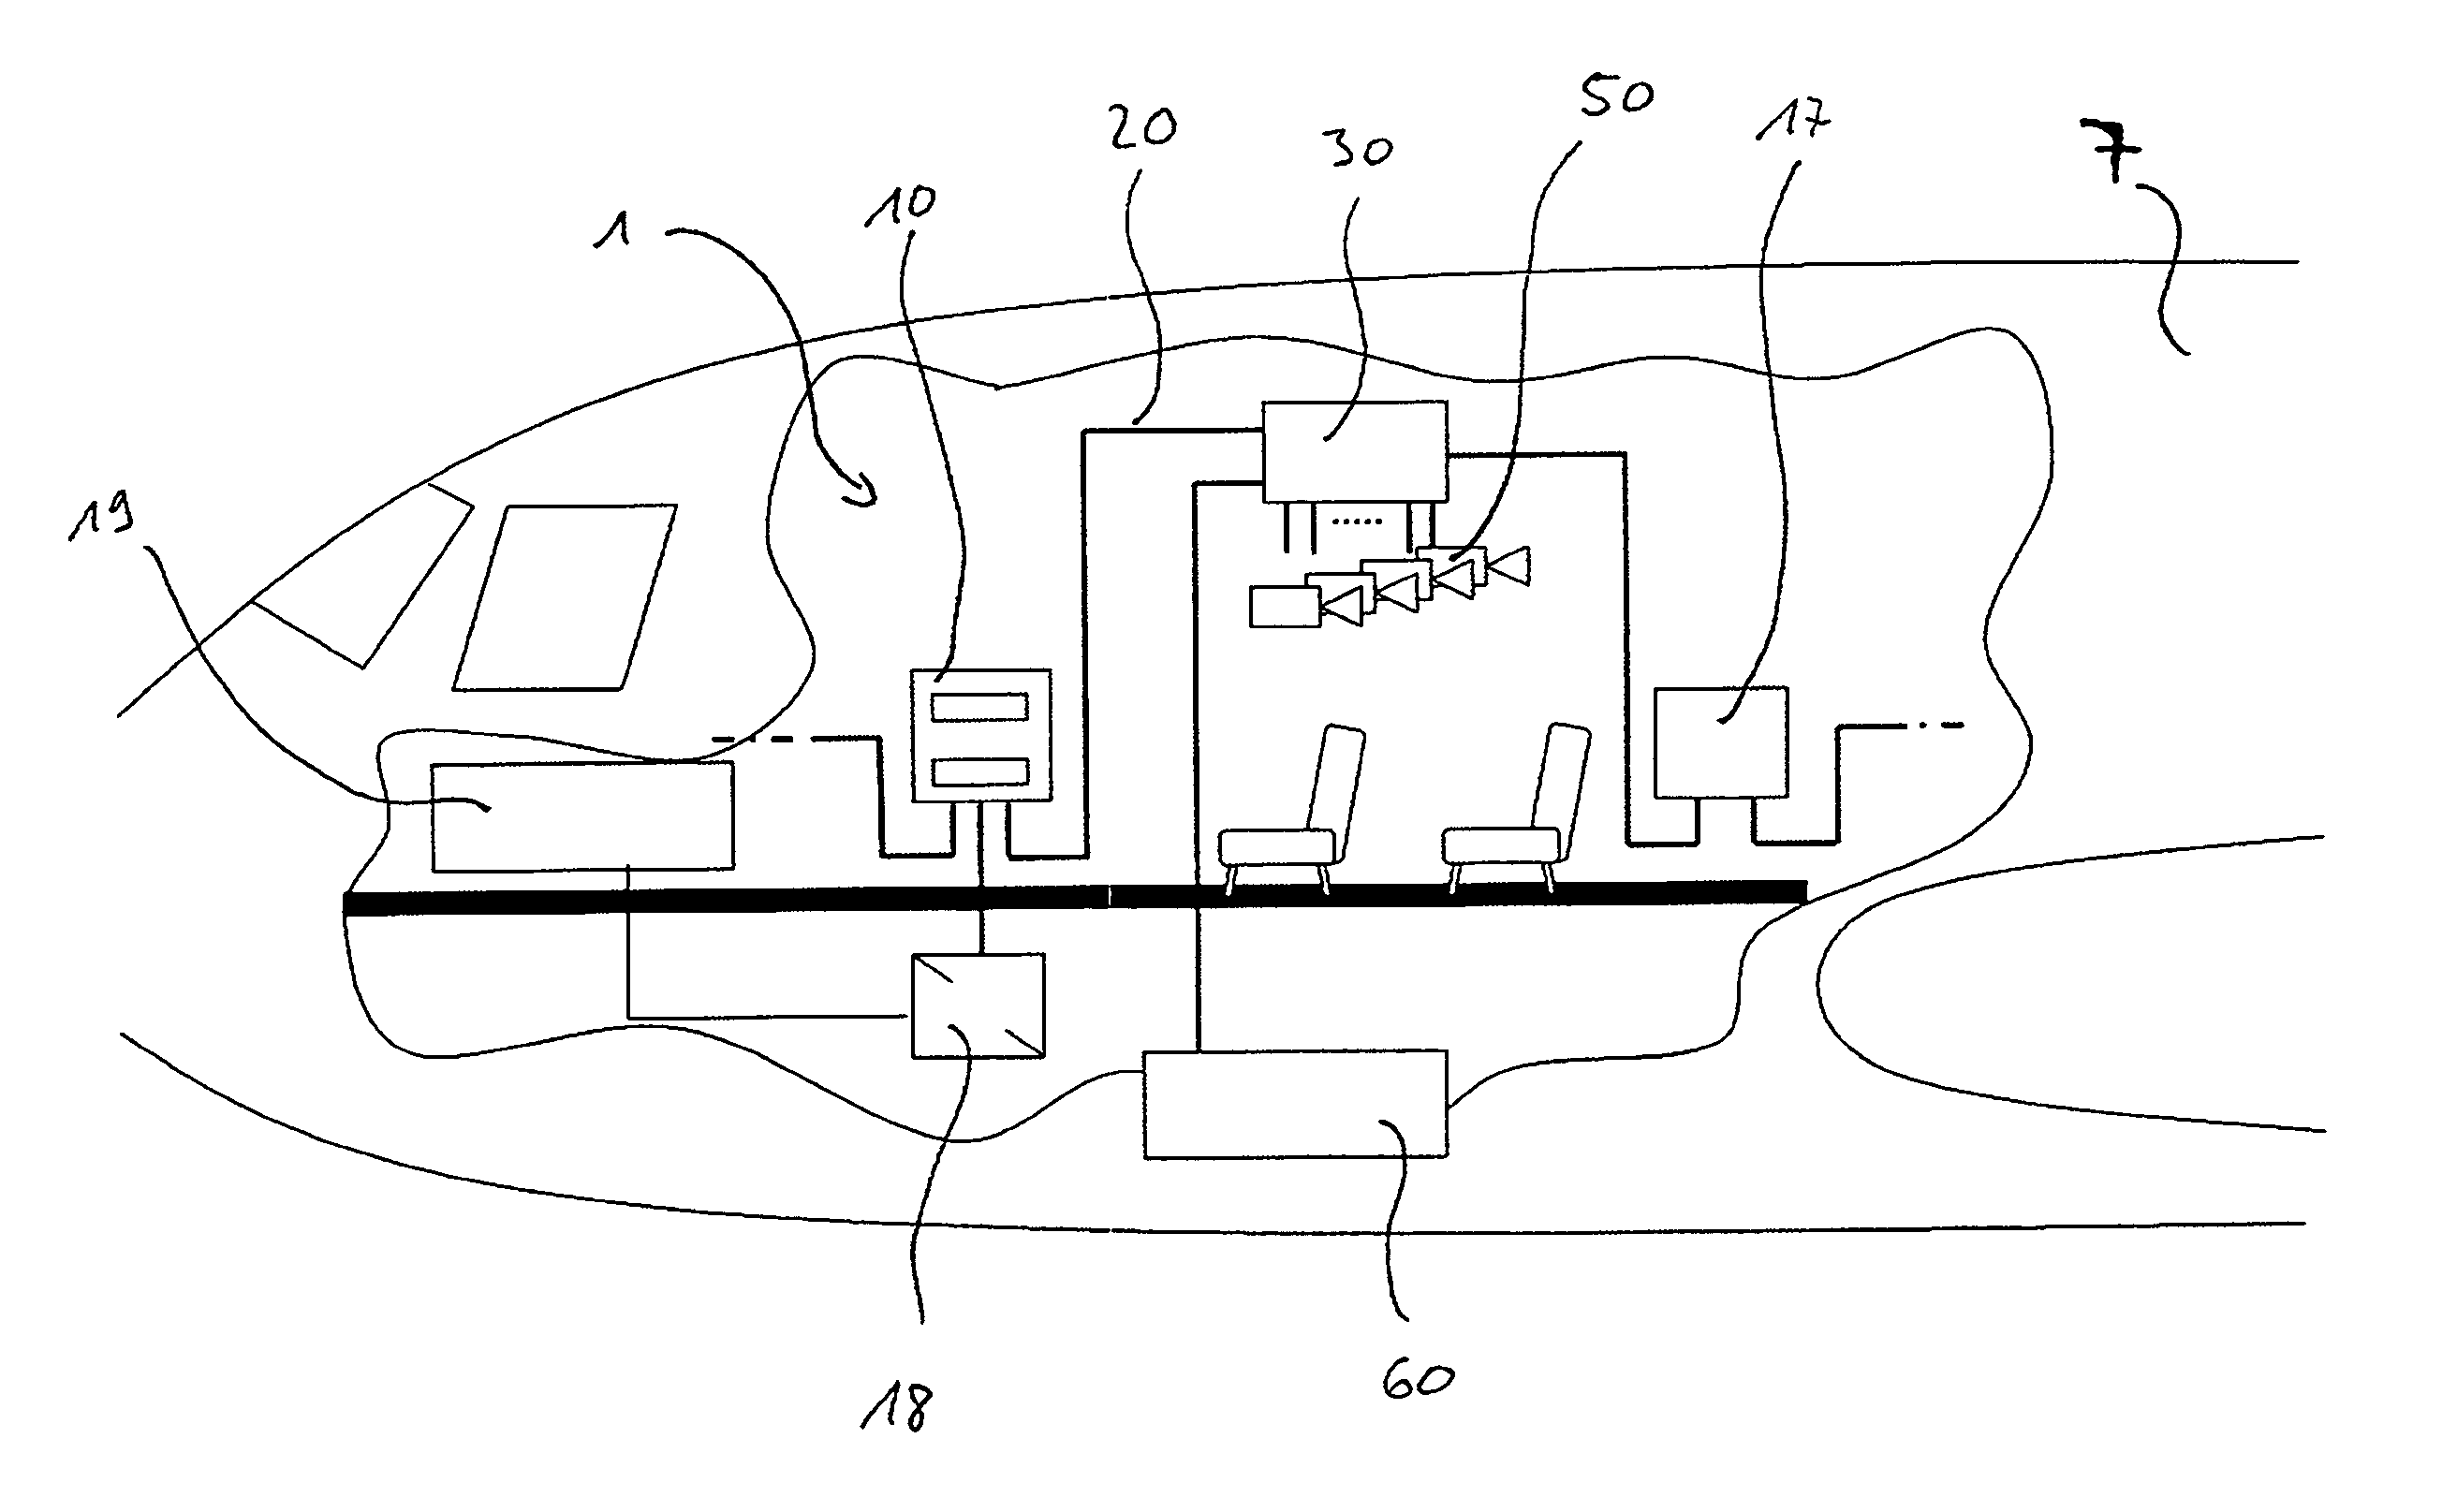 Device for imaging an aircraft cabin